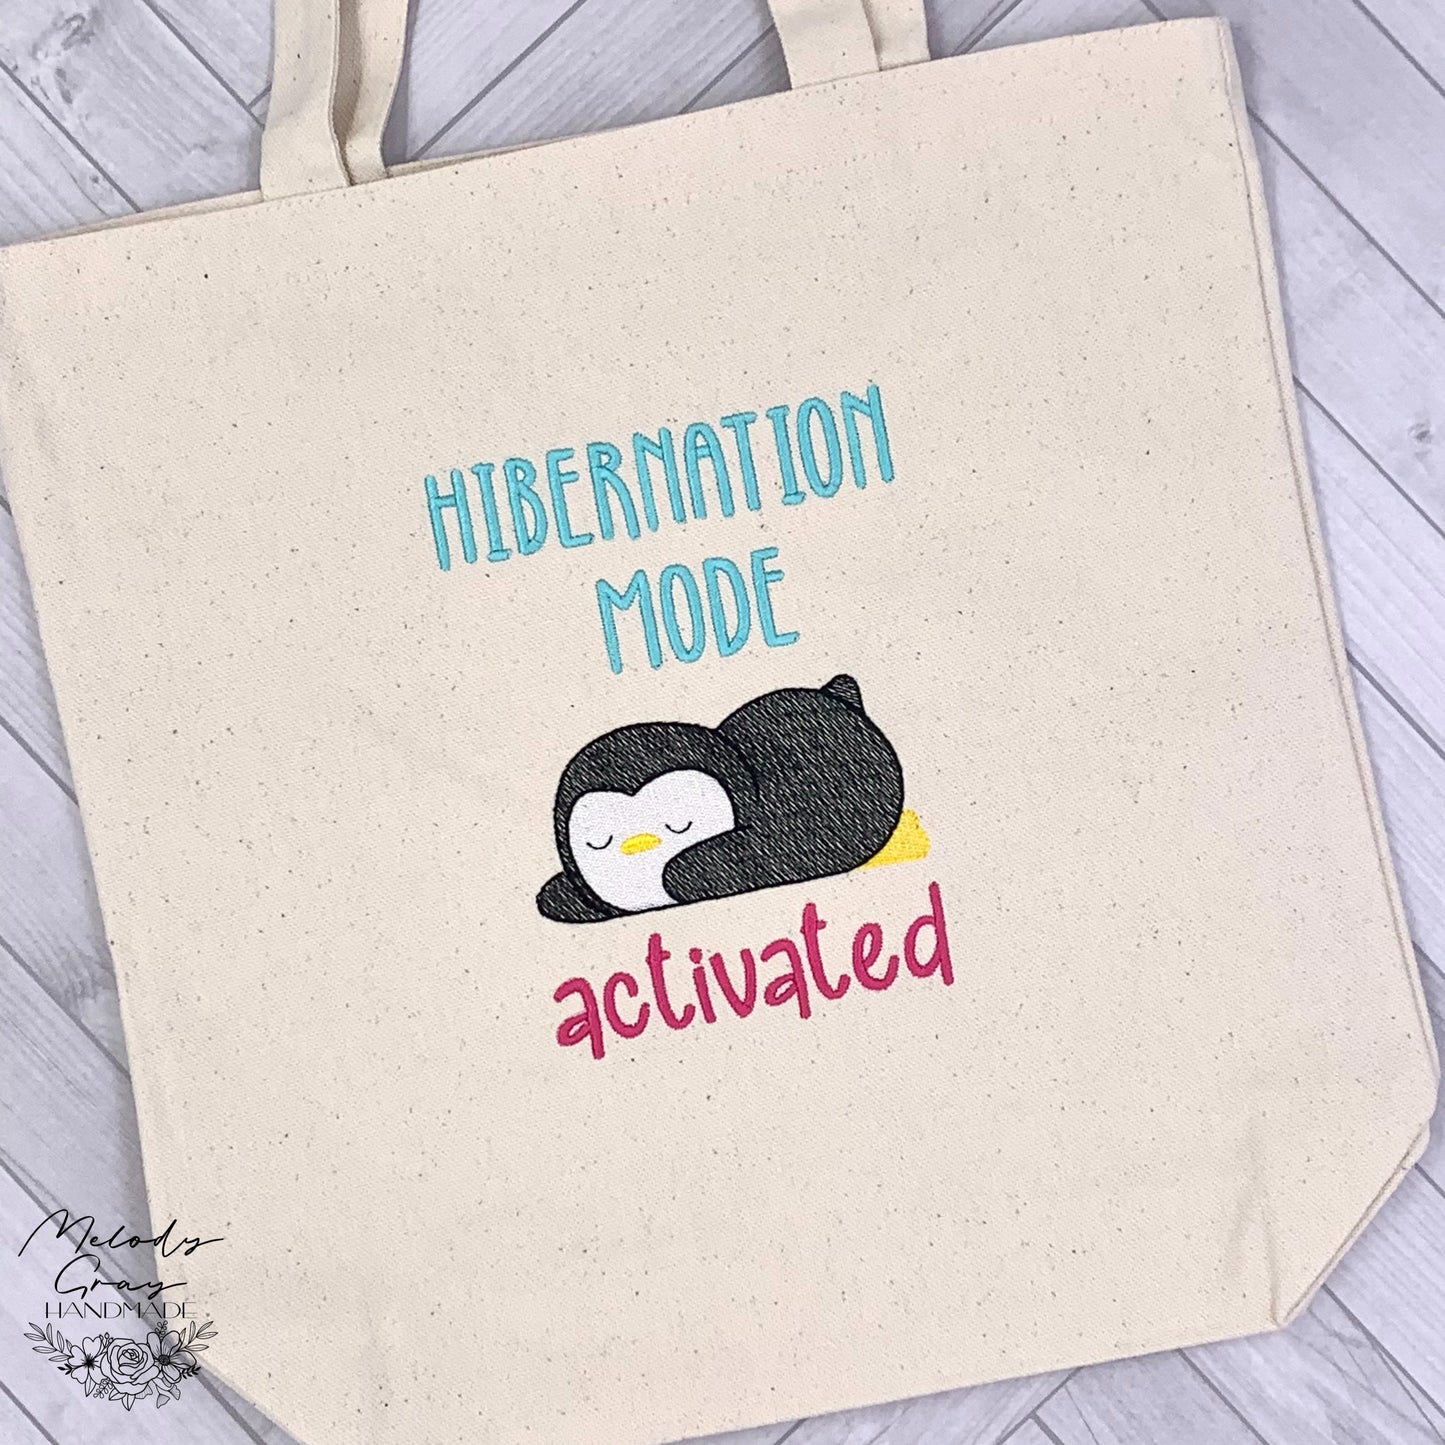 Hibernation Mode Activated Tote